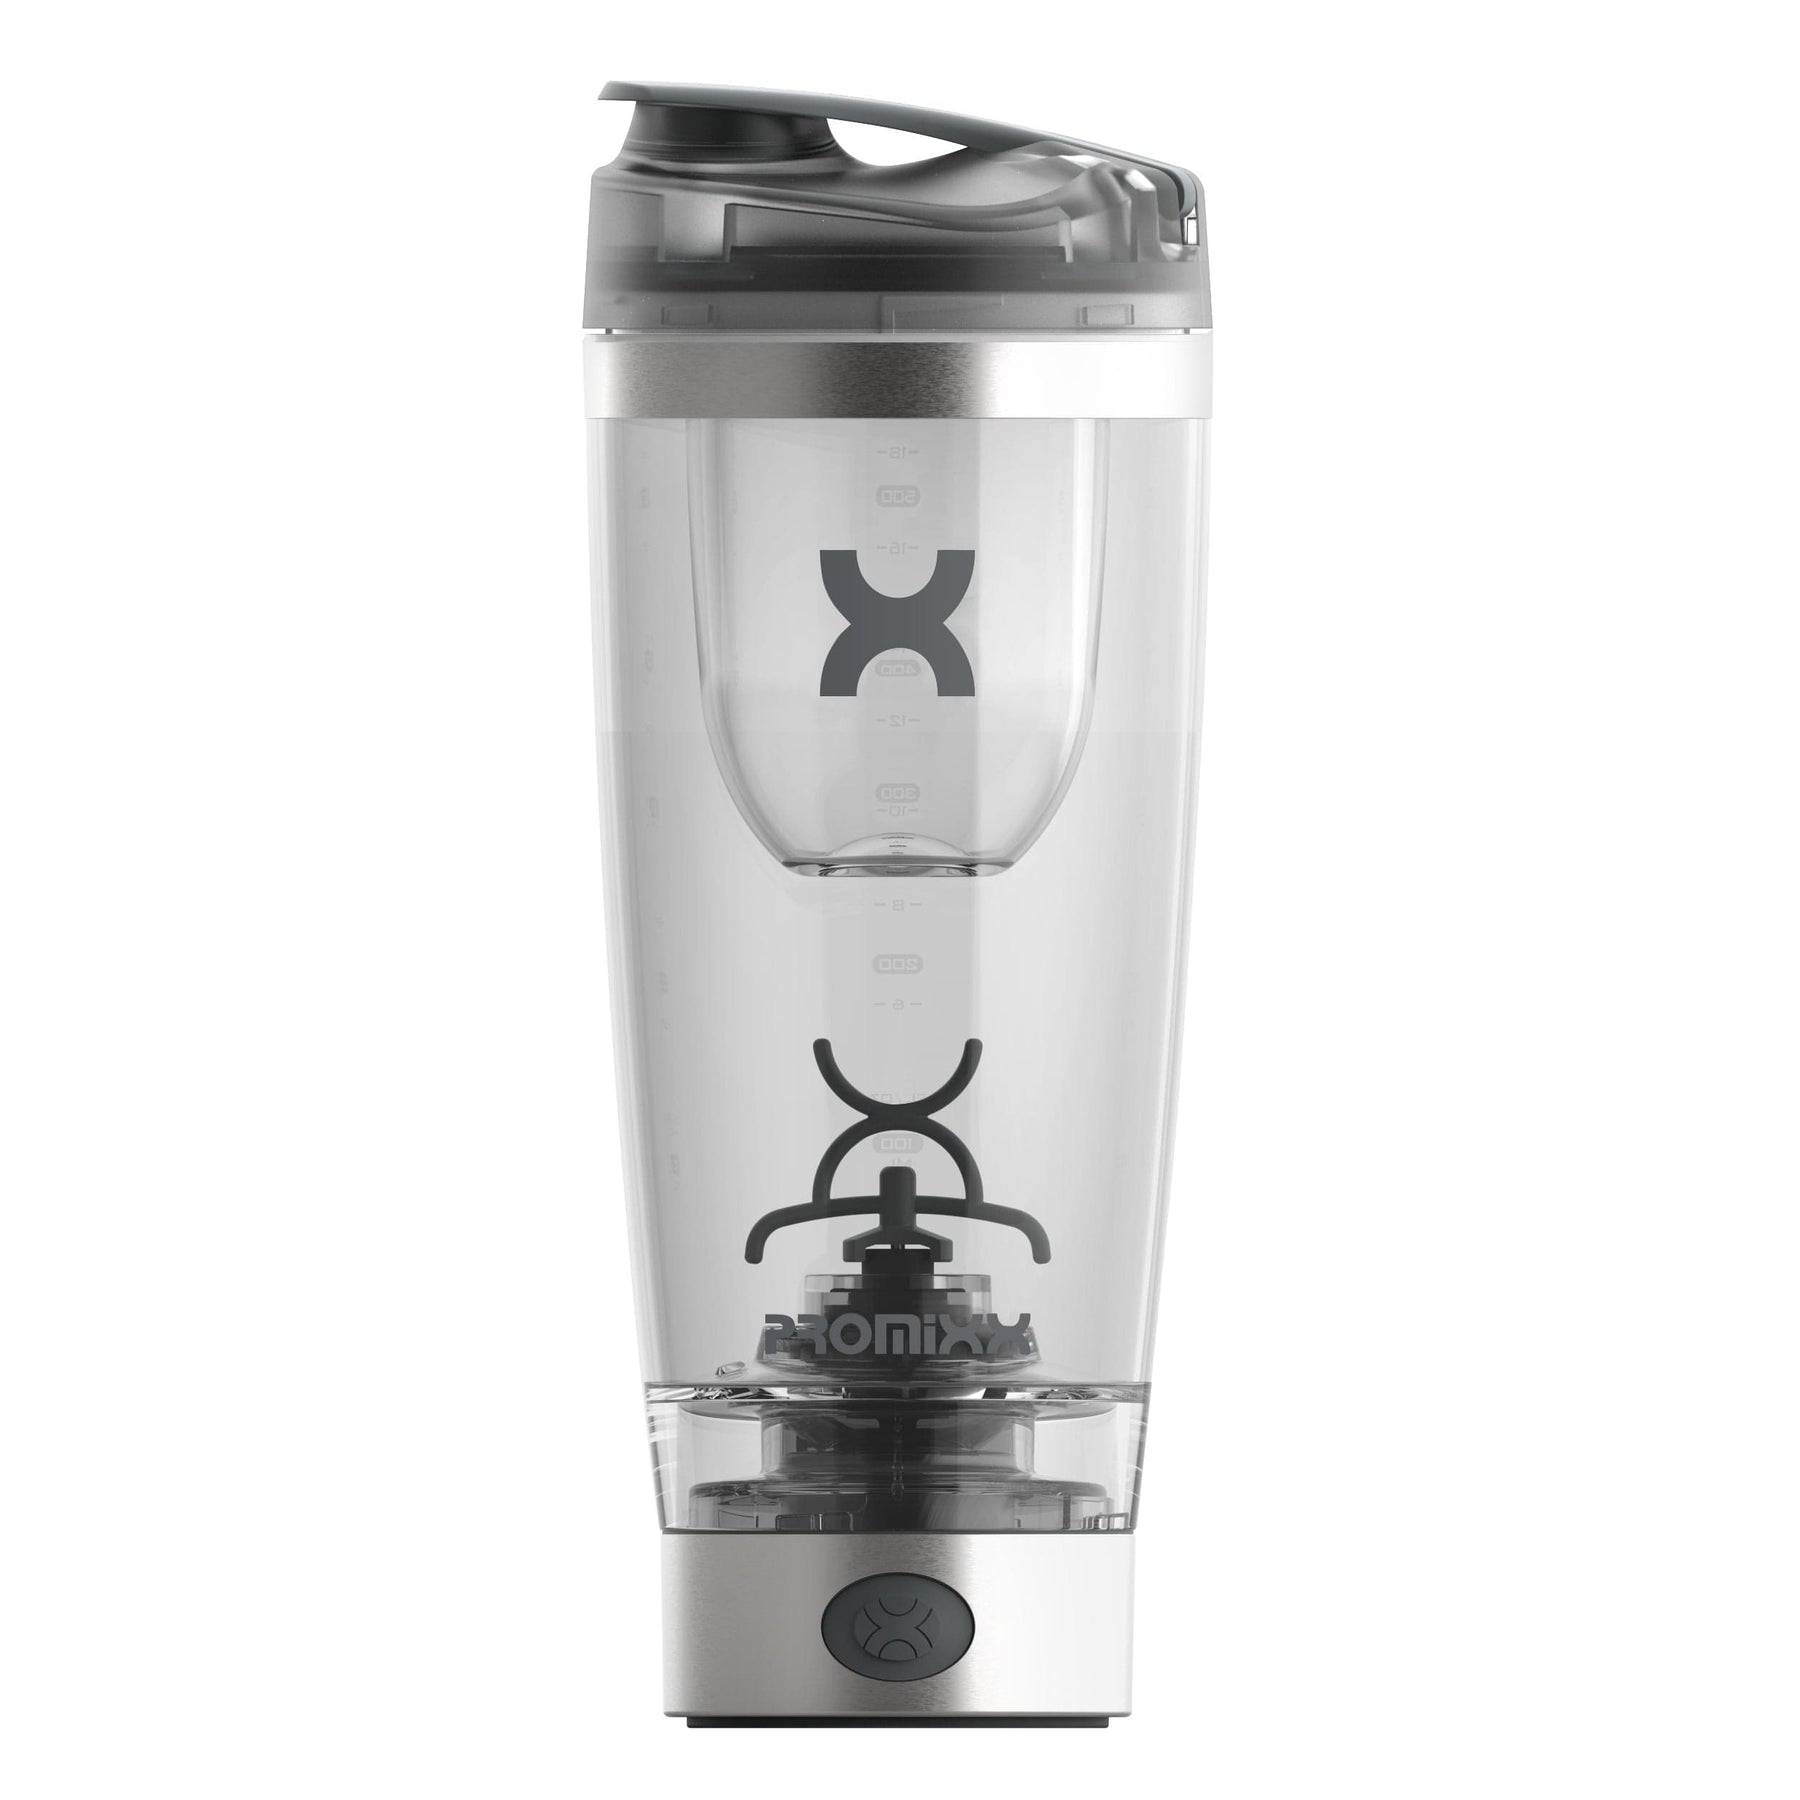 PRO Stainless Steel  Electric Protein Shaker Bottle - PROMiXX